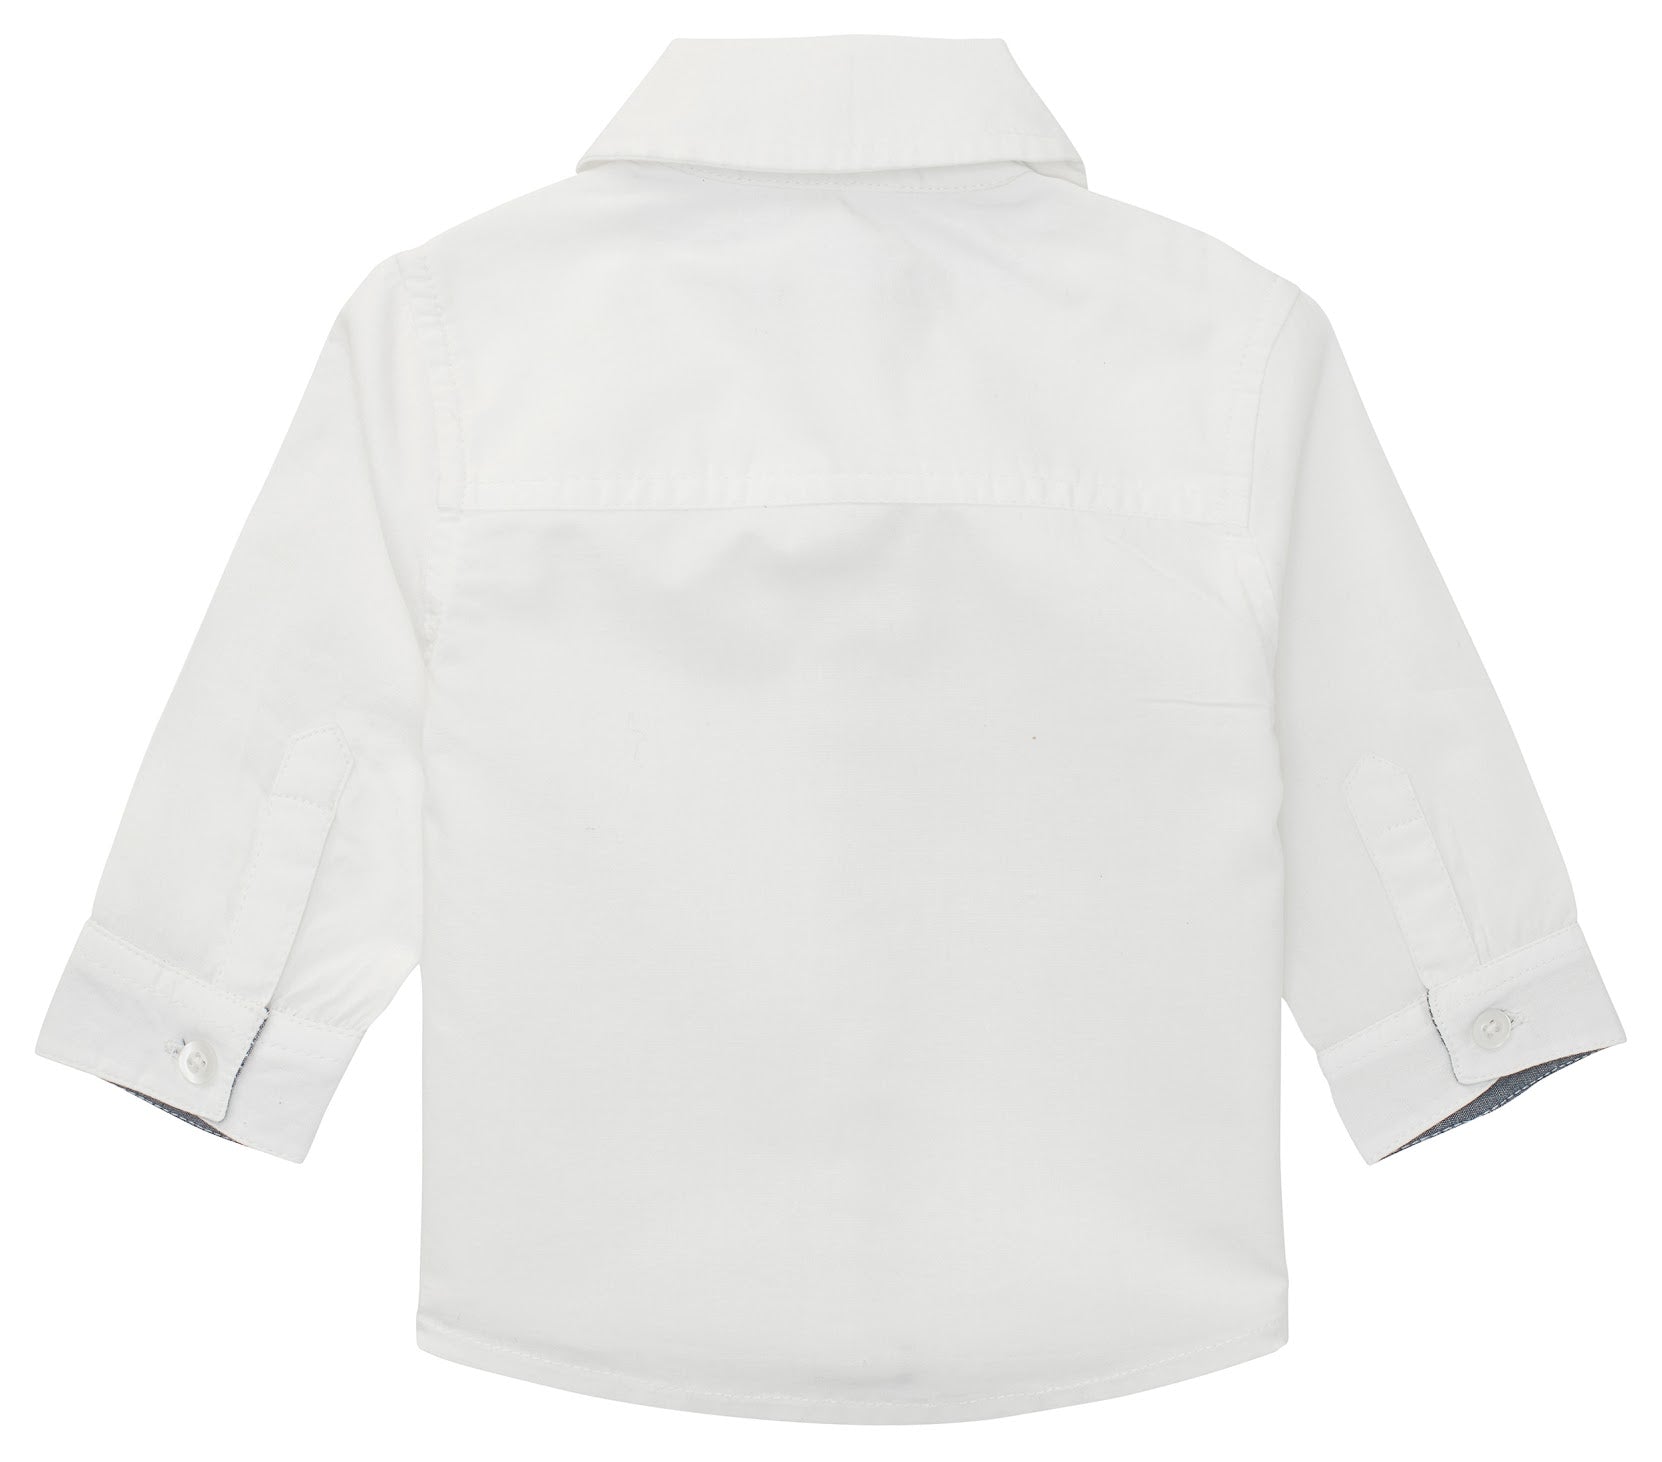 Noppies - Chemise blanche 4-6 mois